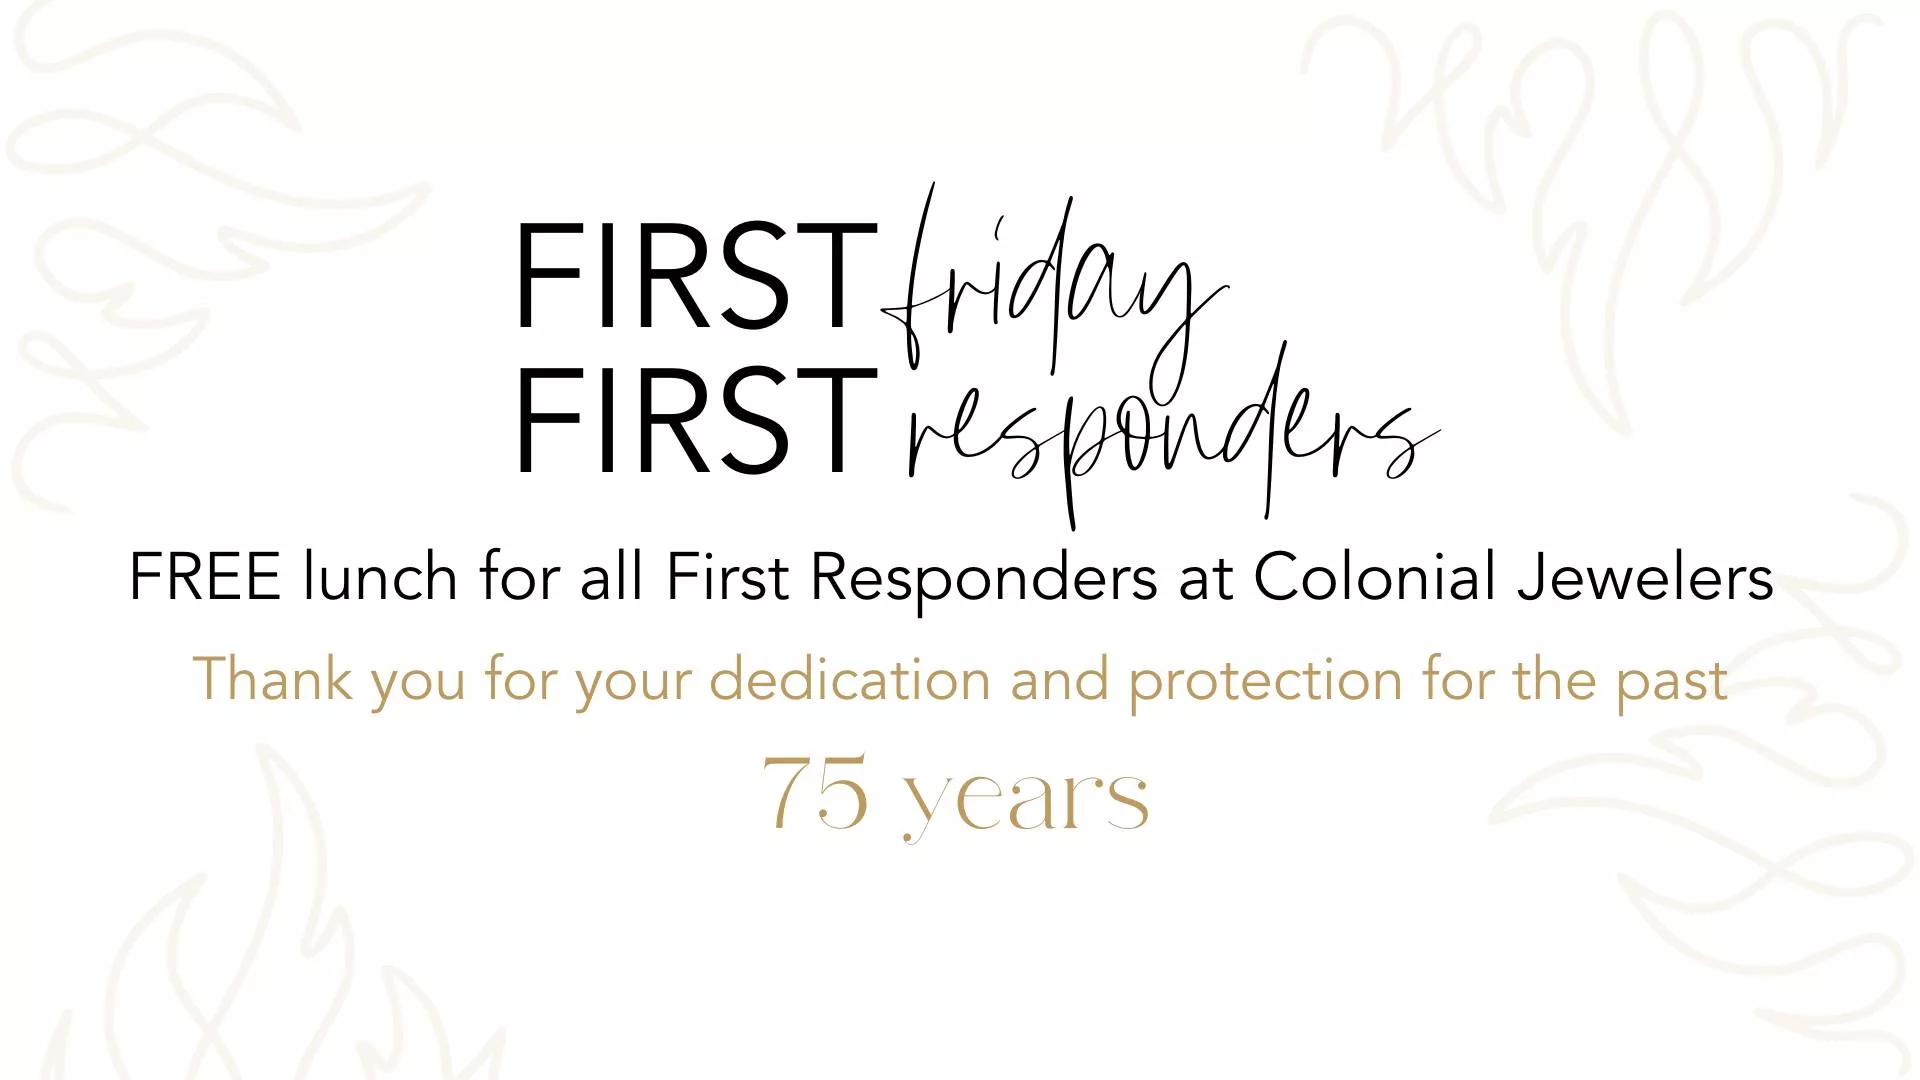 First Responder First Fridays at Colonial Jewelers – WAFY